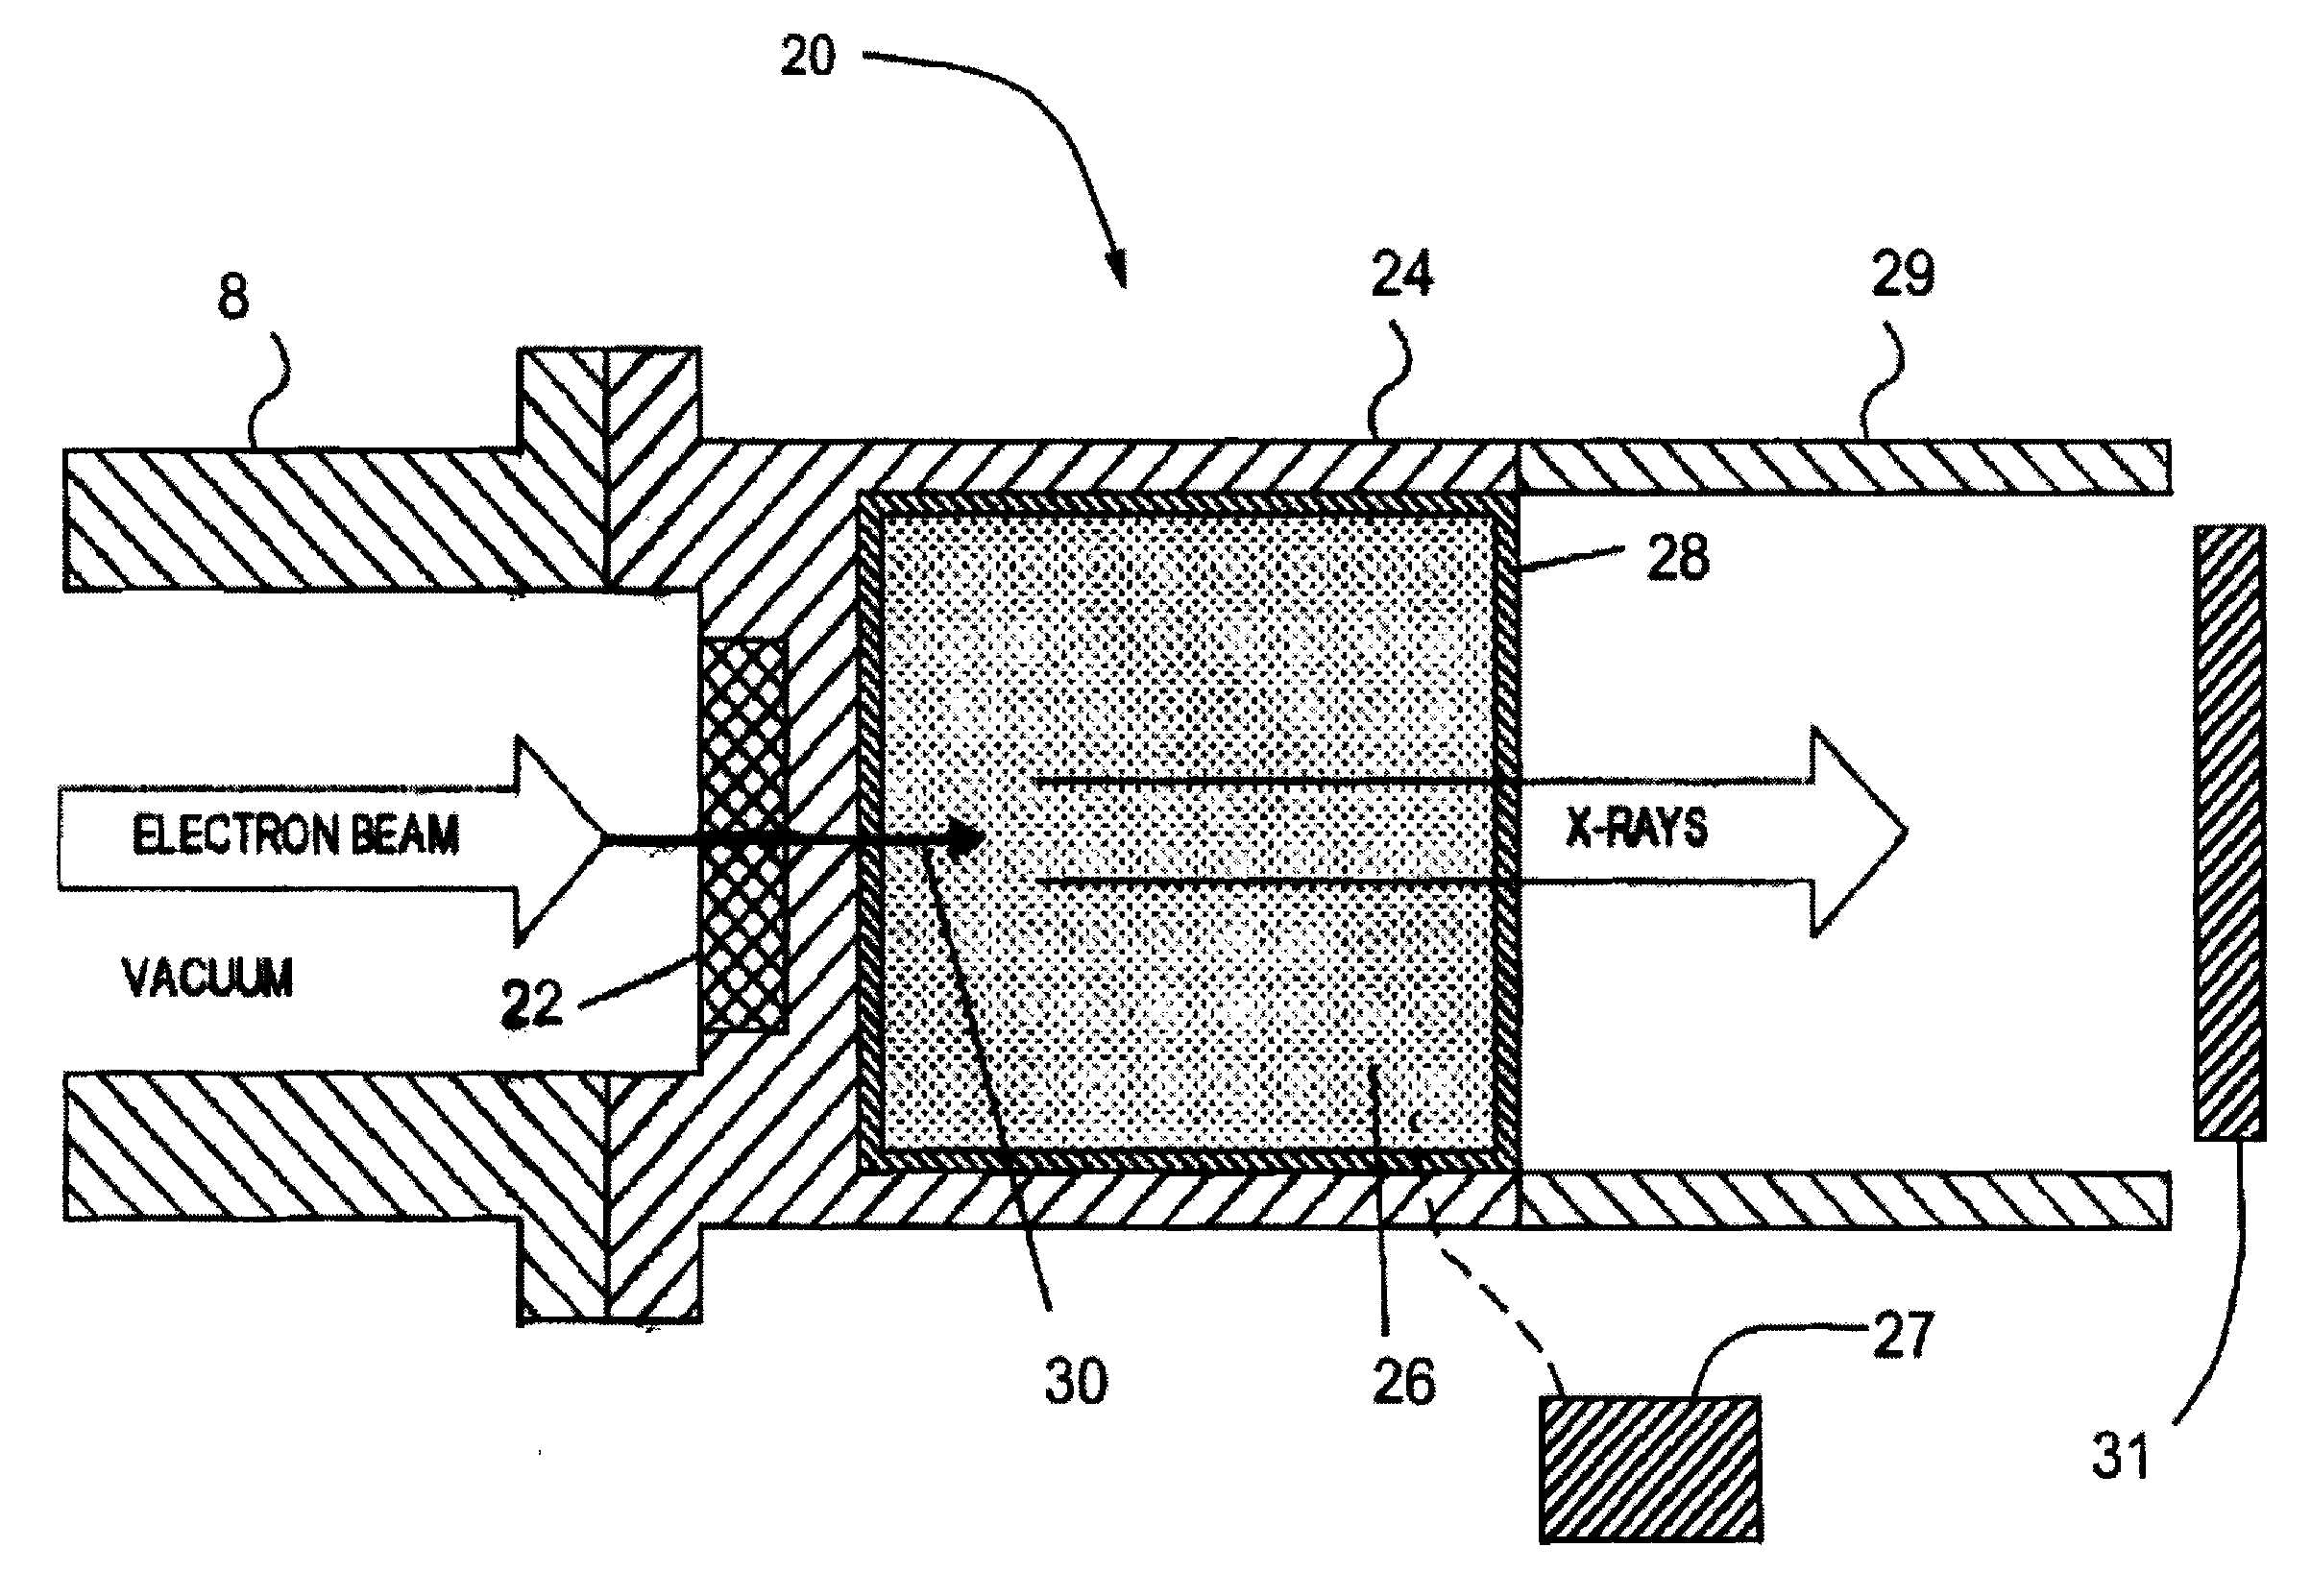 Systems and methods for cargo scanning and radiotherapy using a traveling wave linear accelerator based x-ray source using pulse width to modulate pulse-to-pulse dosage